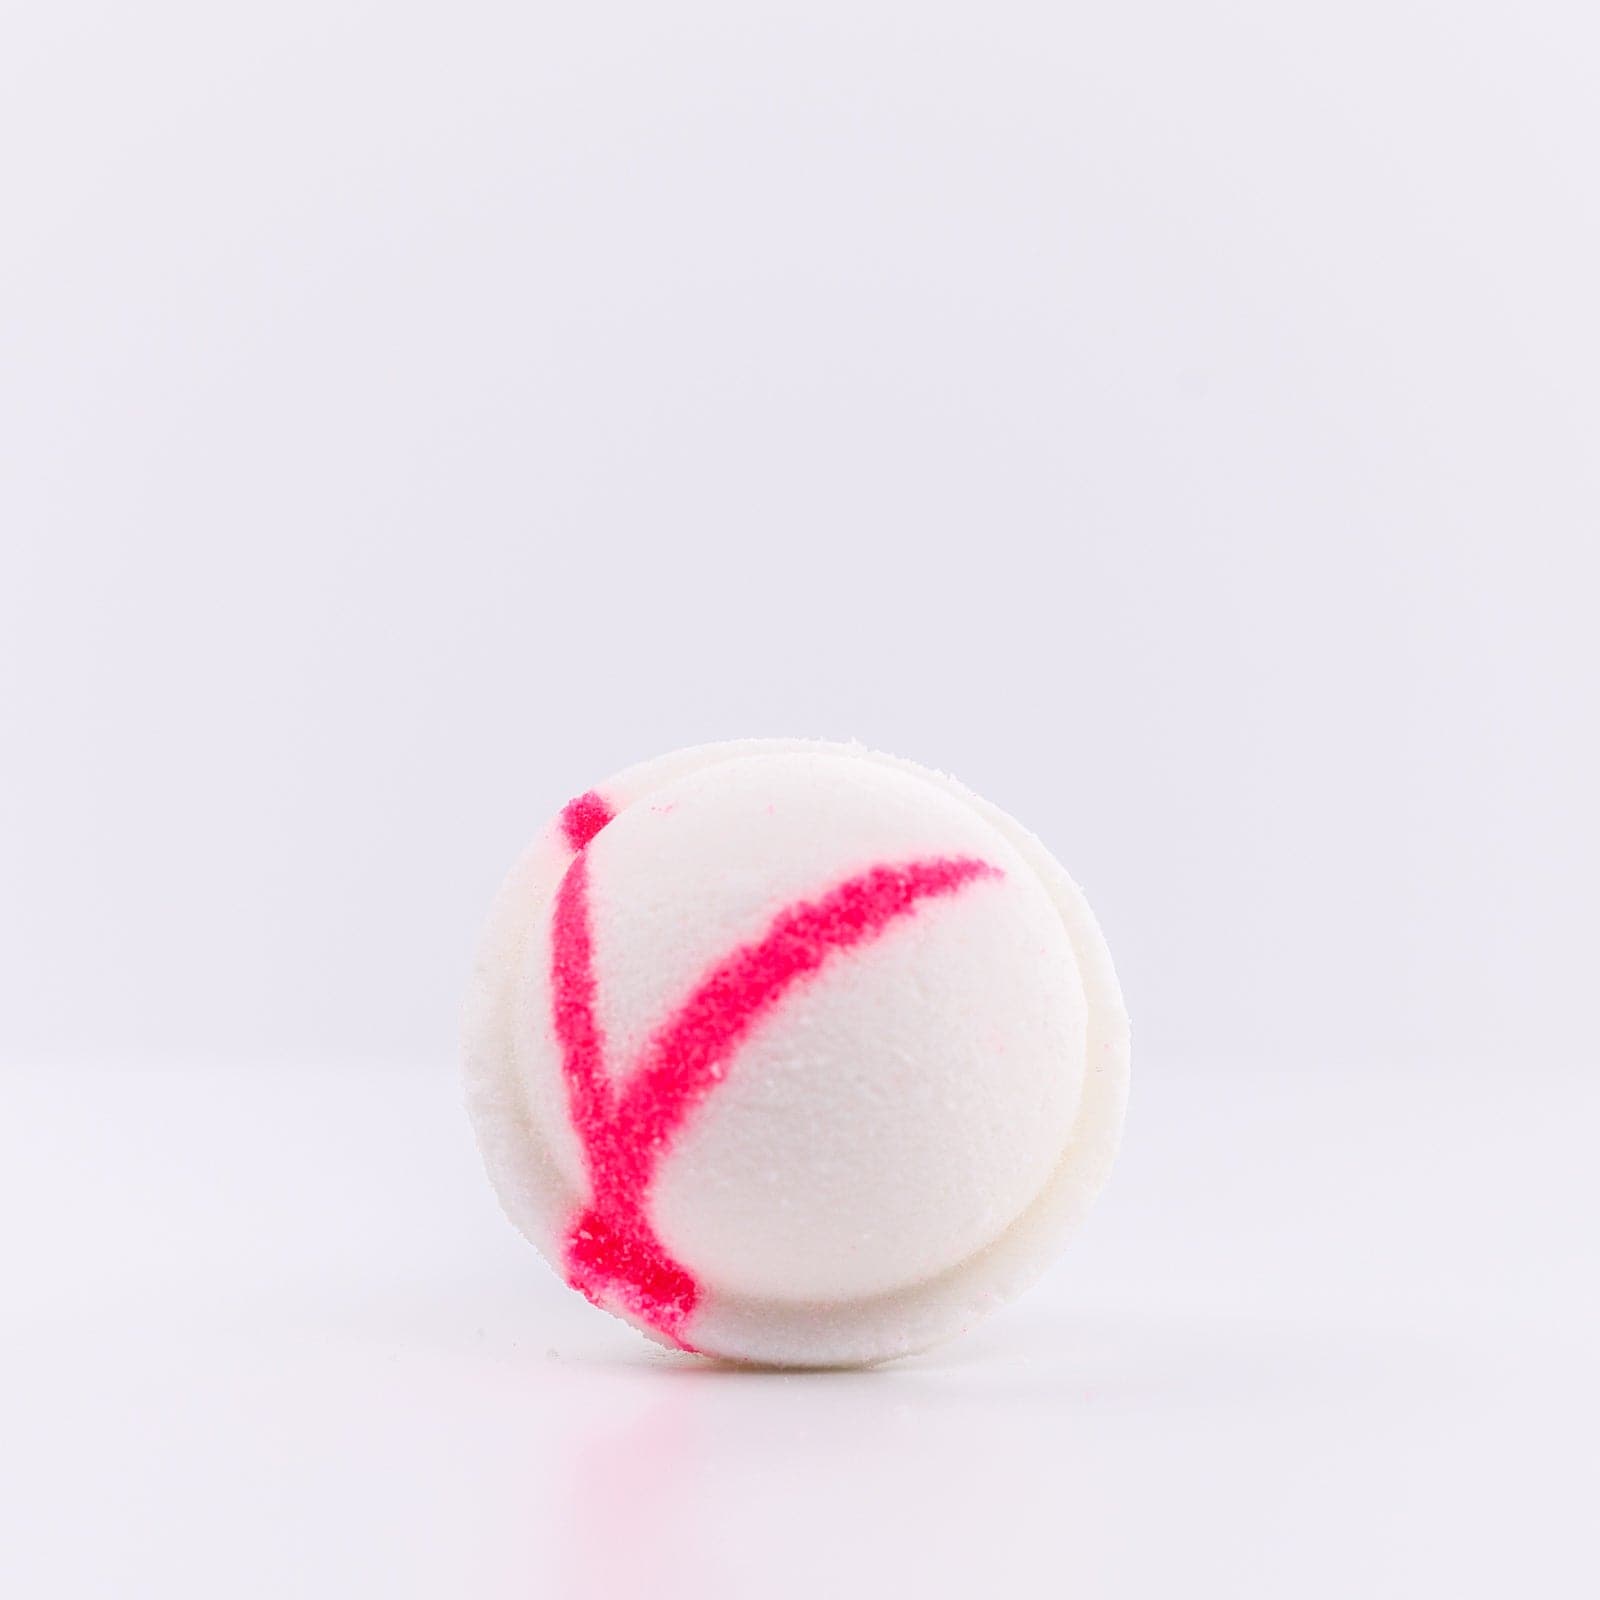 the top of white Mermaid Bath Bomb with a pink "X" design on it